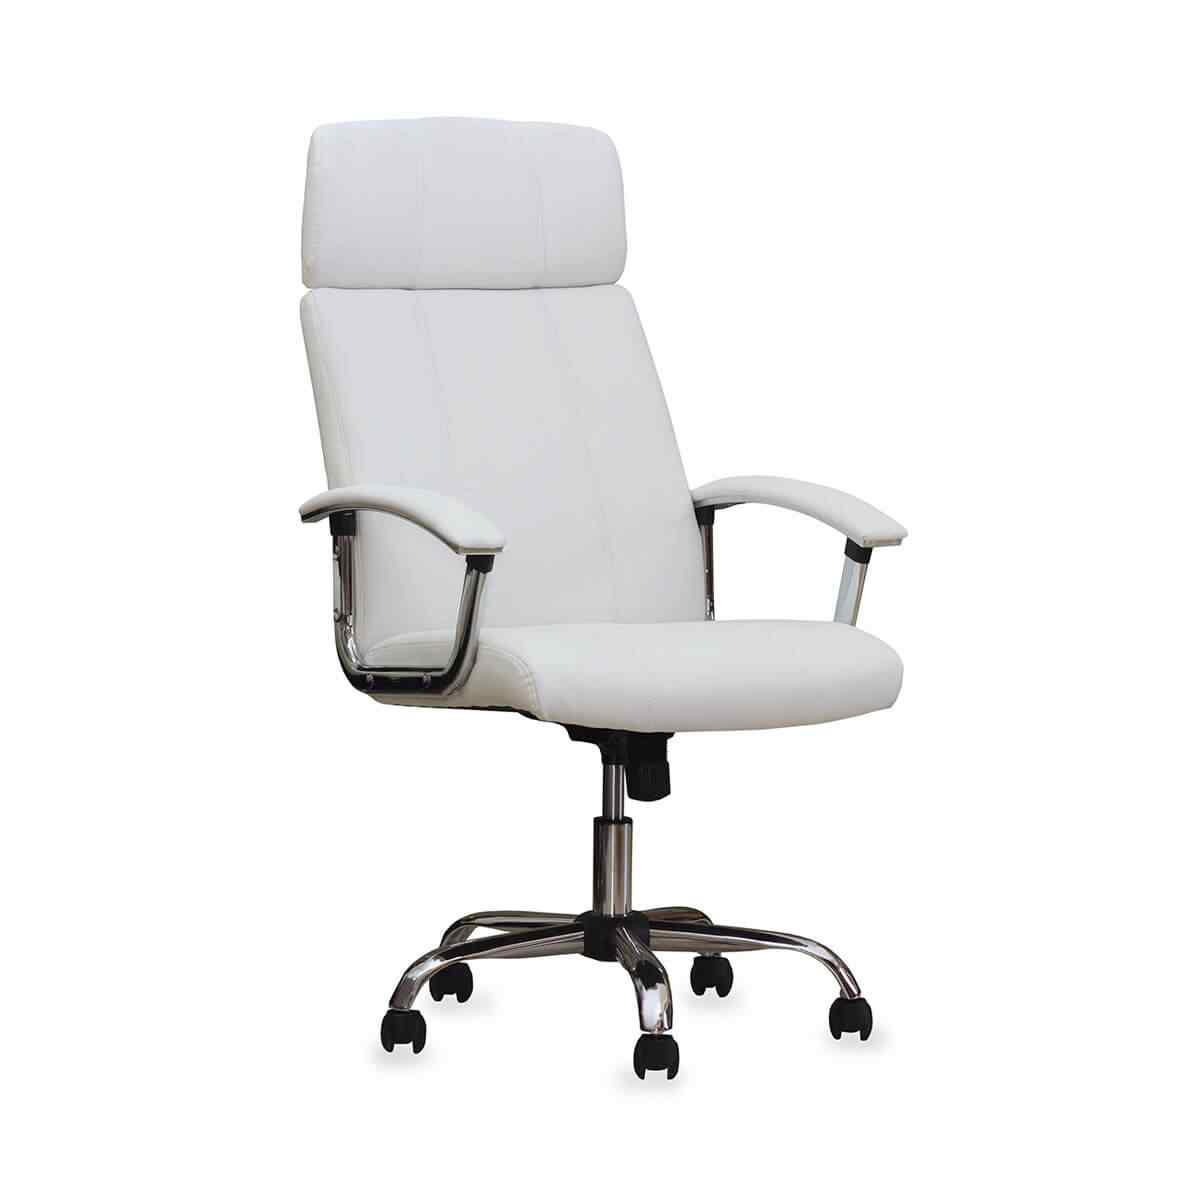 White leather office chair - Greater Houston Roofing